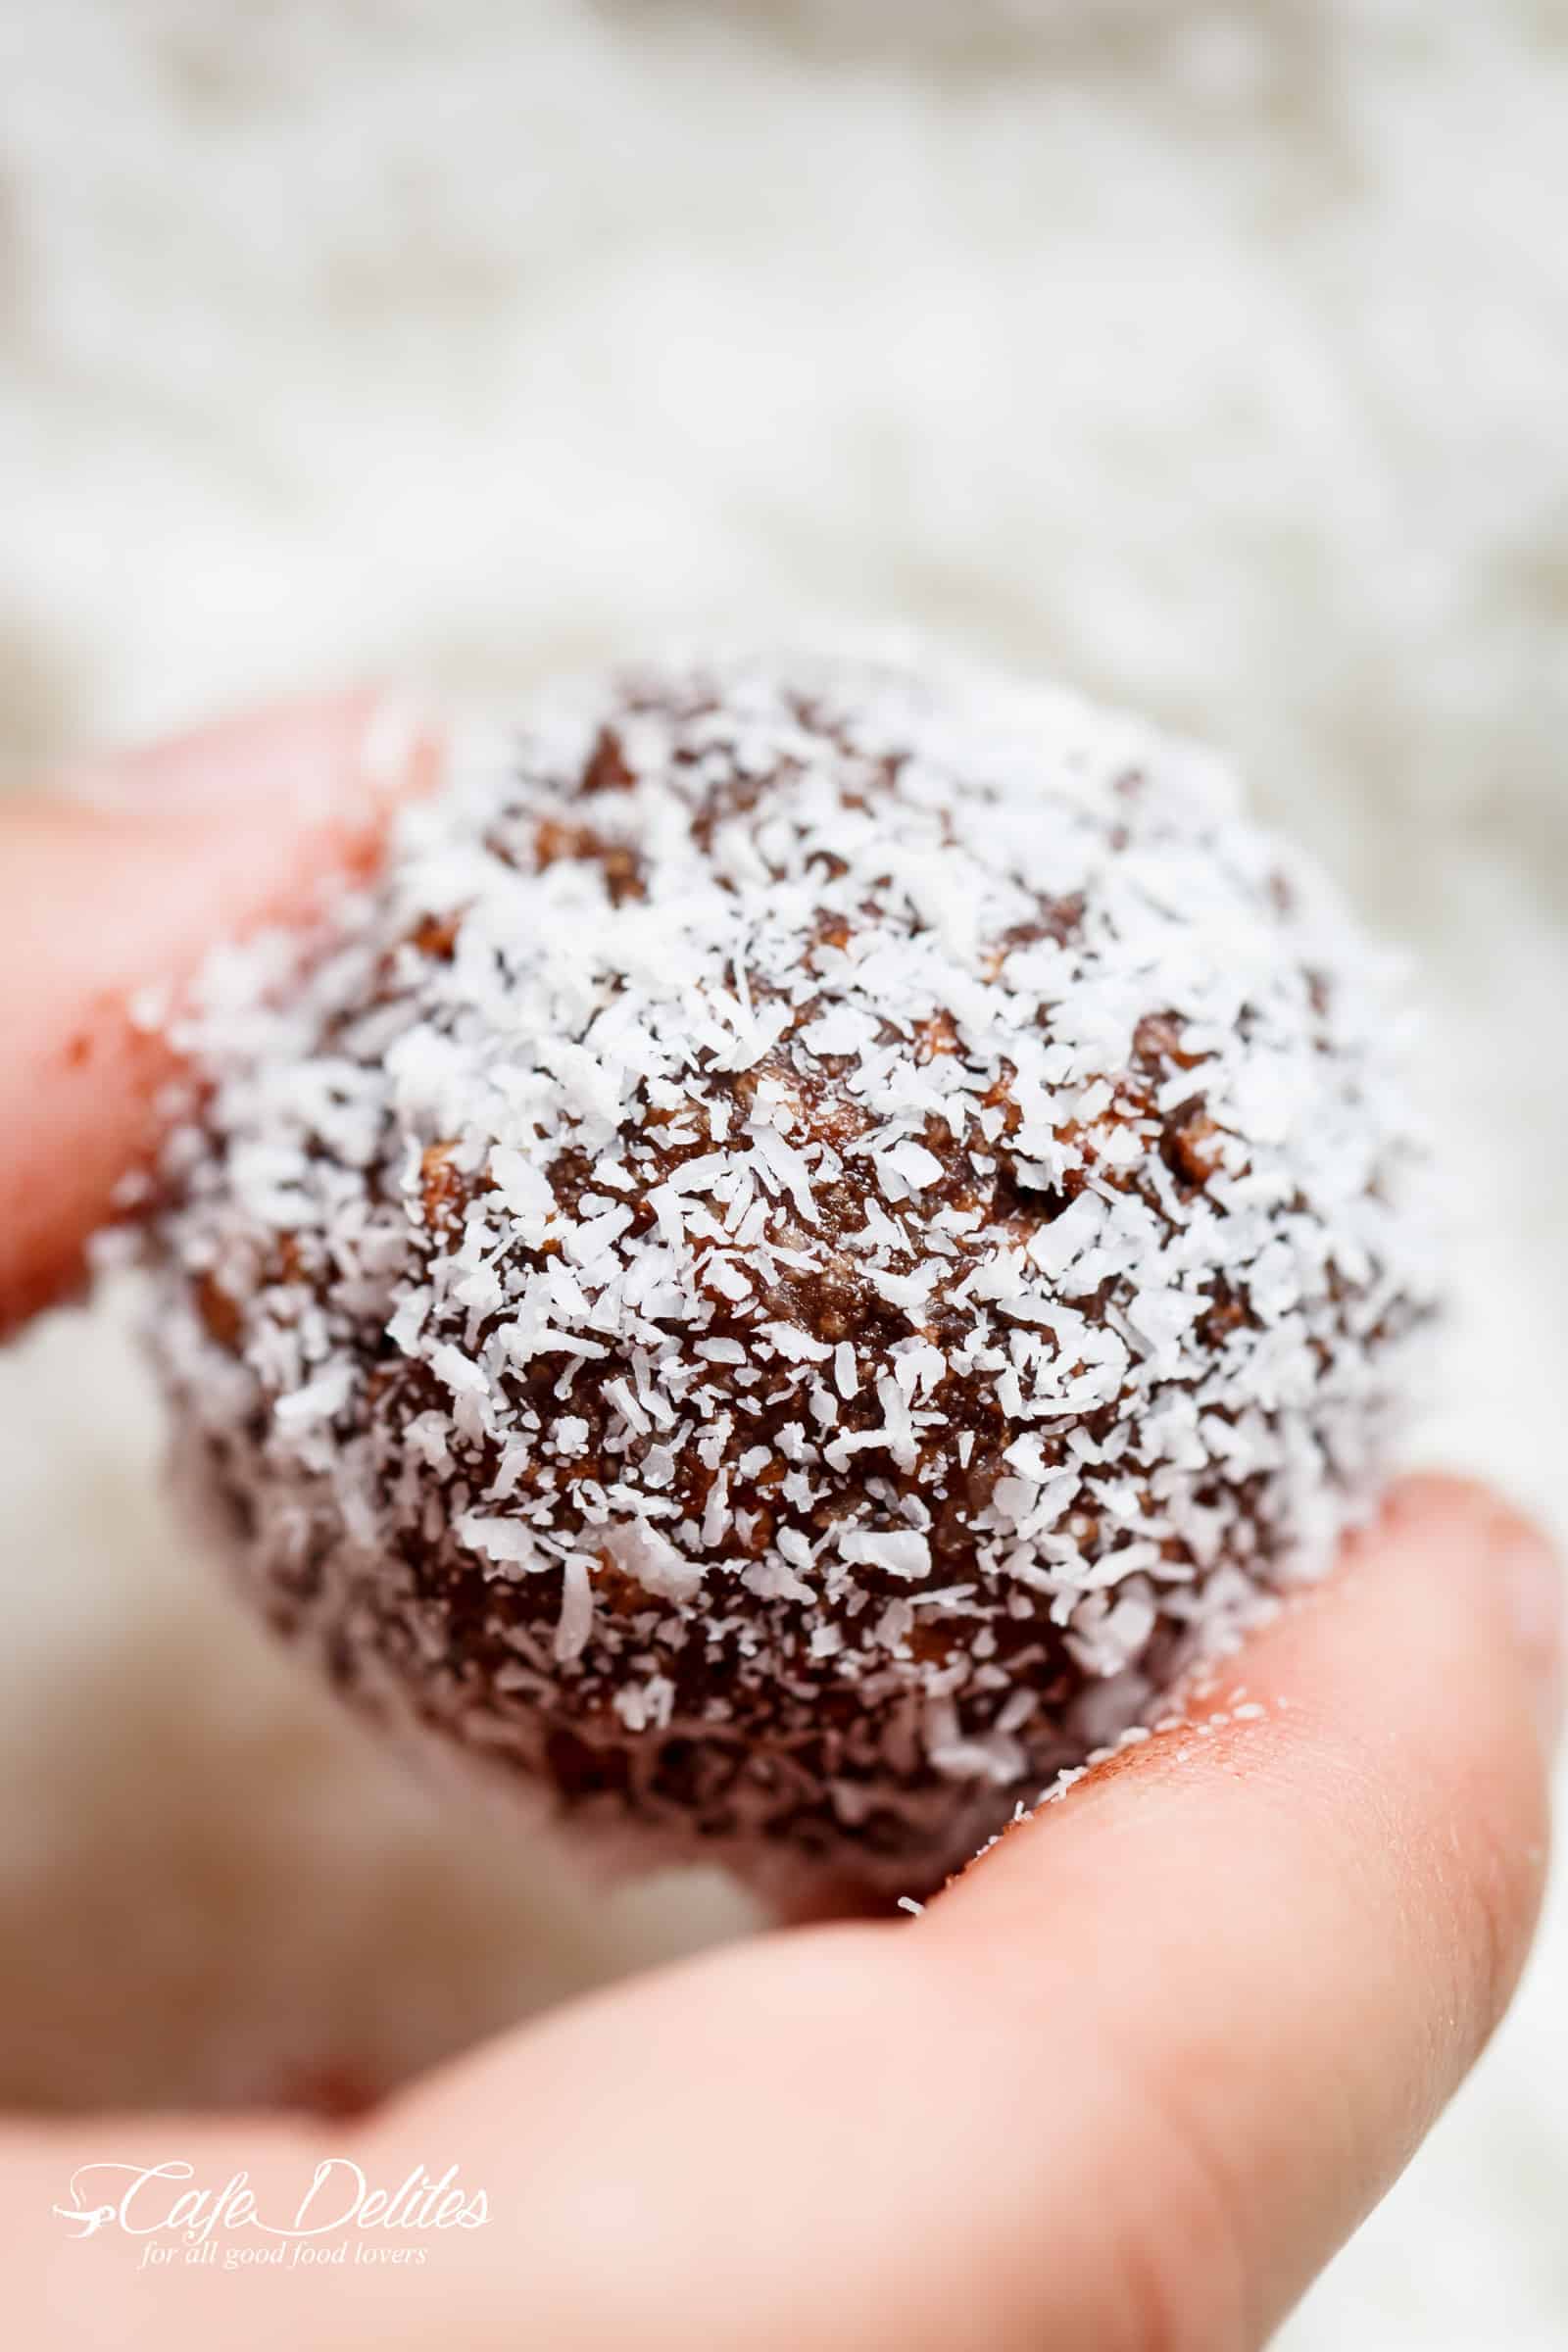 Rum Balls or Chocolate Coconut Balls for Christmas Cookie Exchange! | cafedelites.com